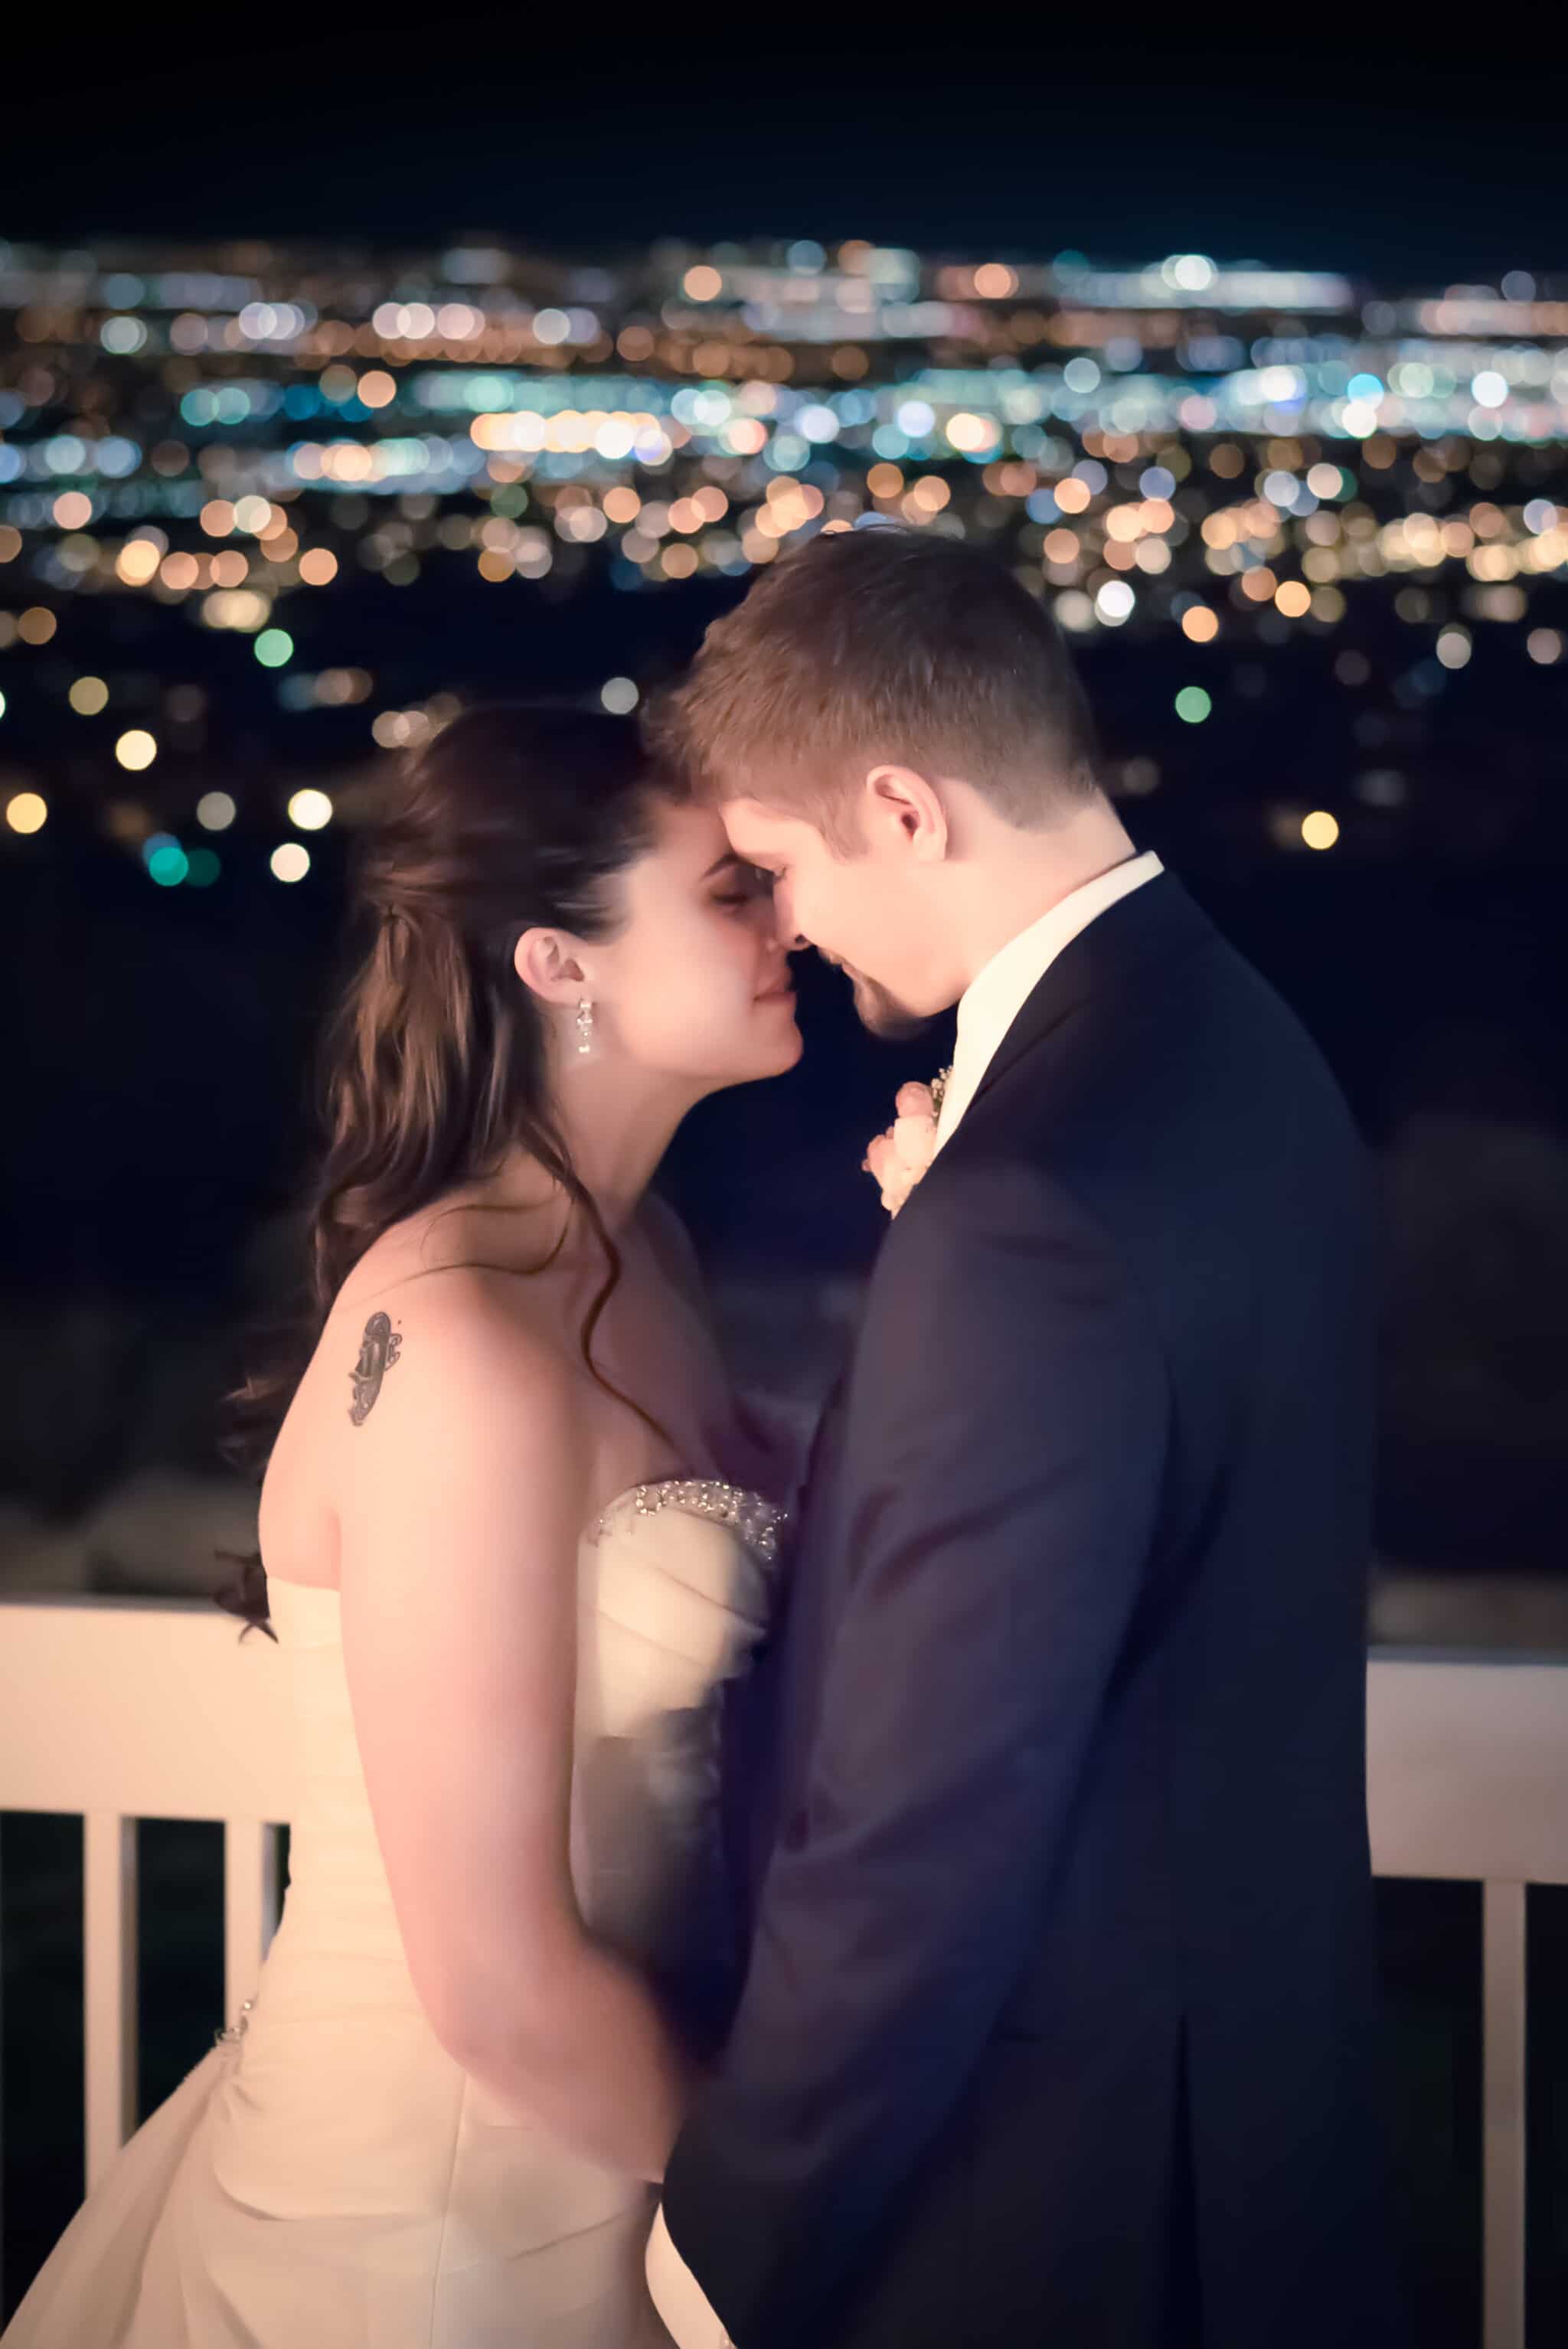 Evening portrait of newlyweds with city lights twinkling in the background.